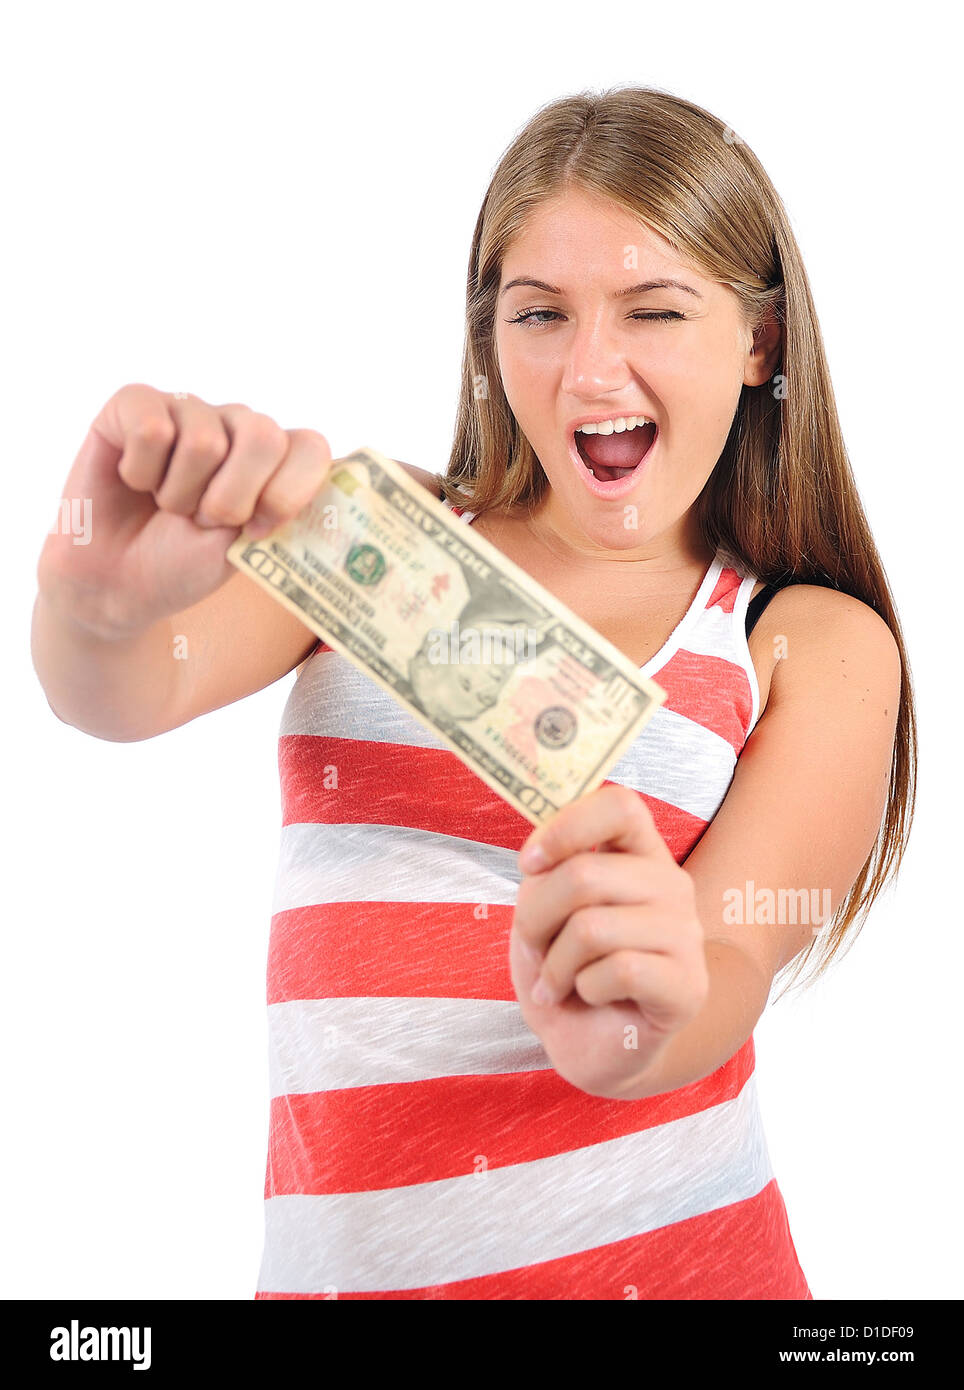 Isolated young casual woman showing money Stock Photo